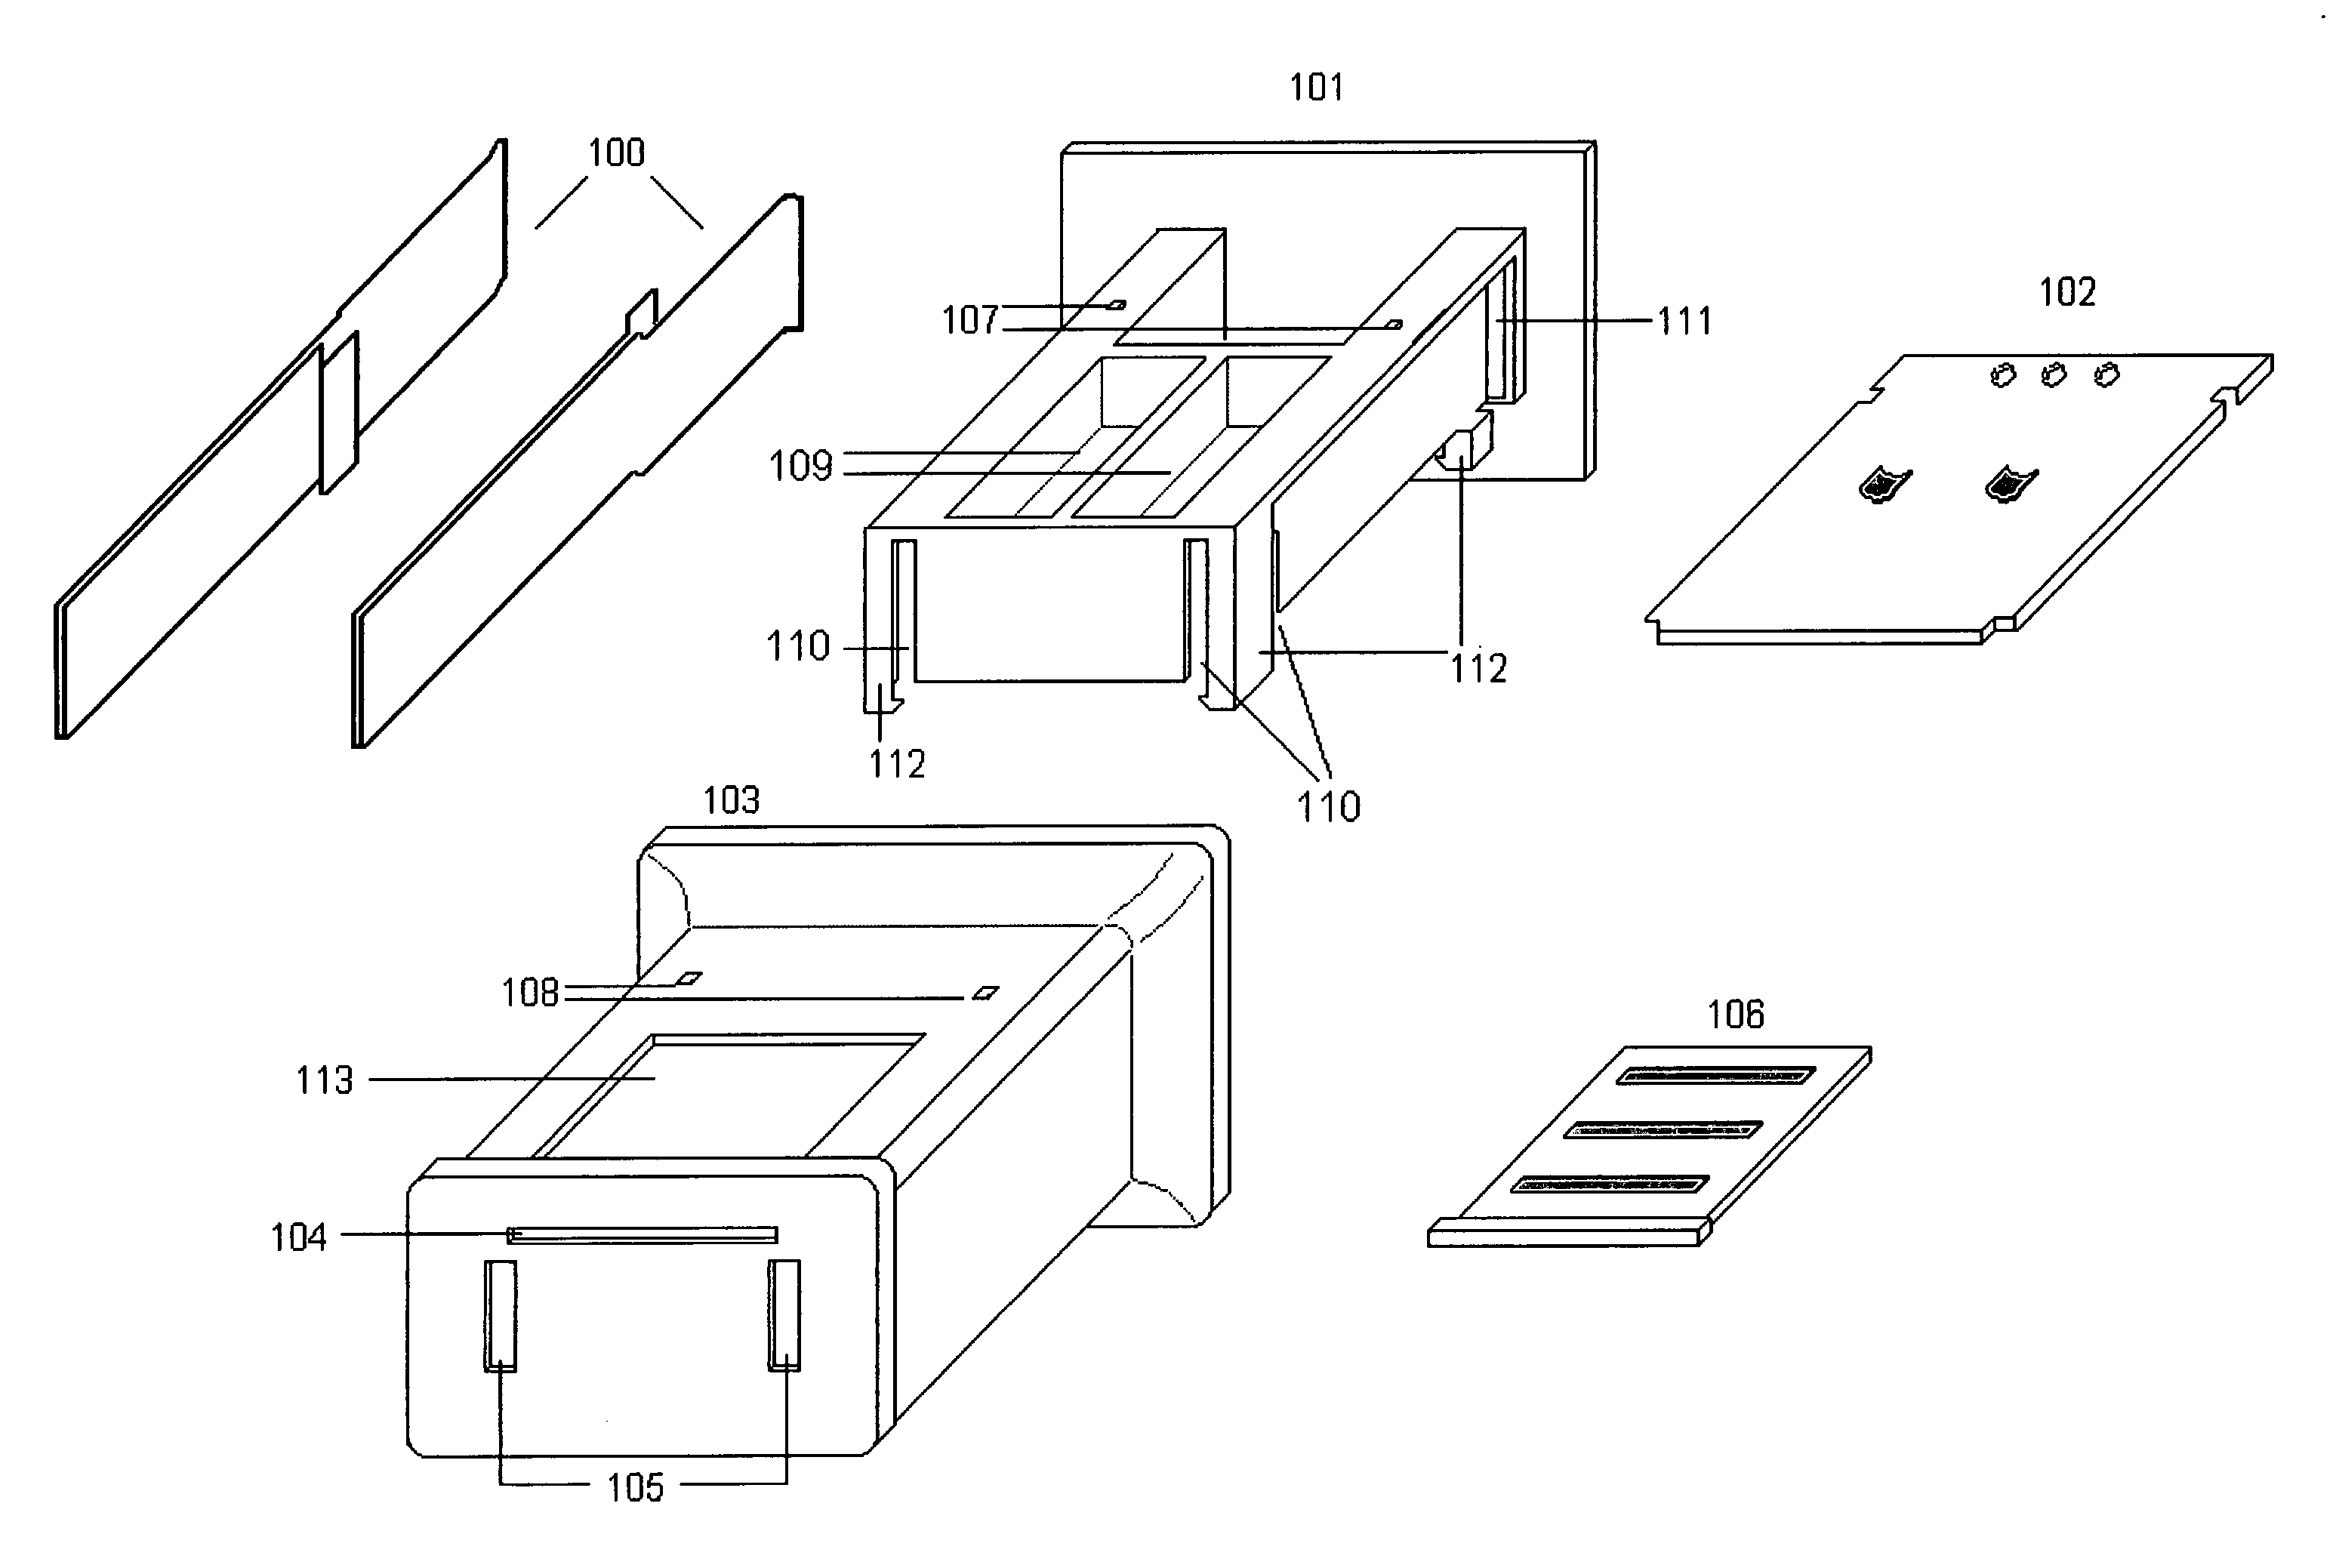 Plug and cord connector set with integrated circuitry